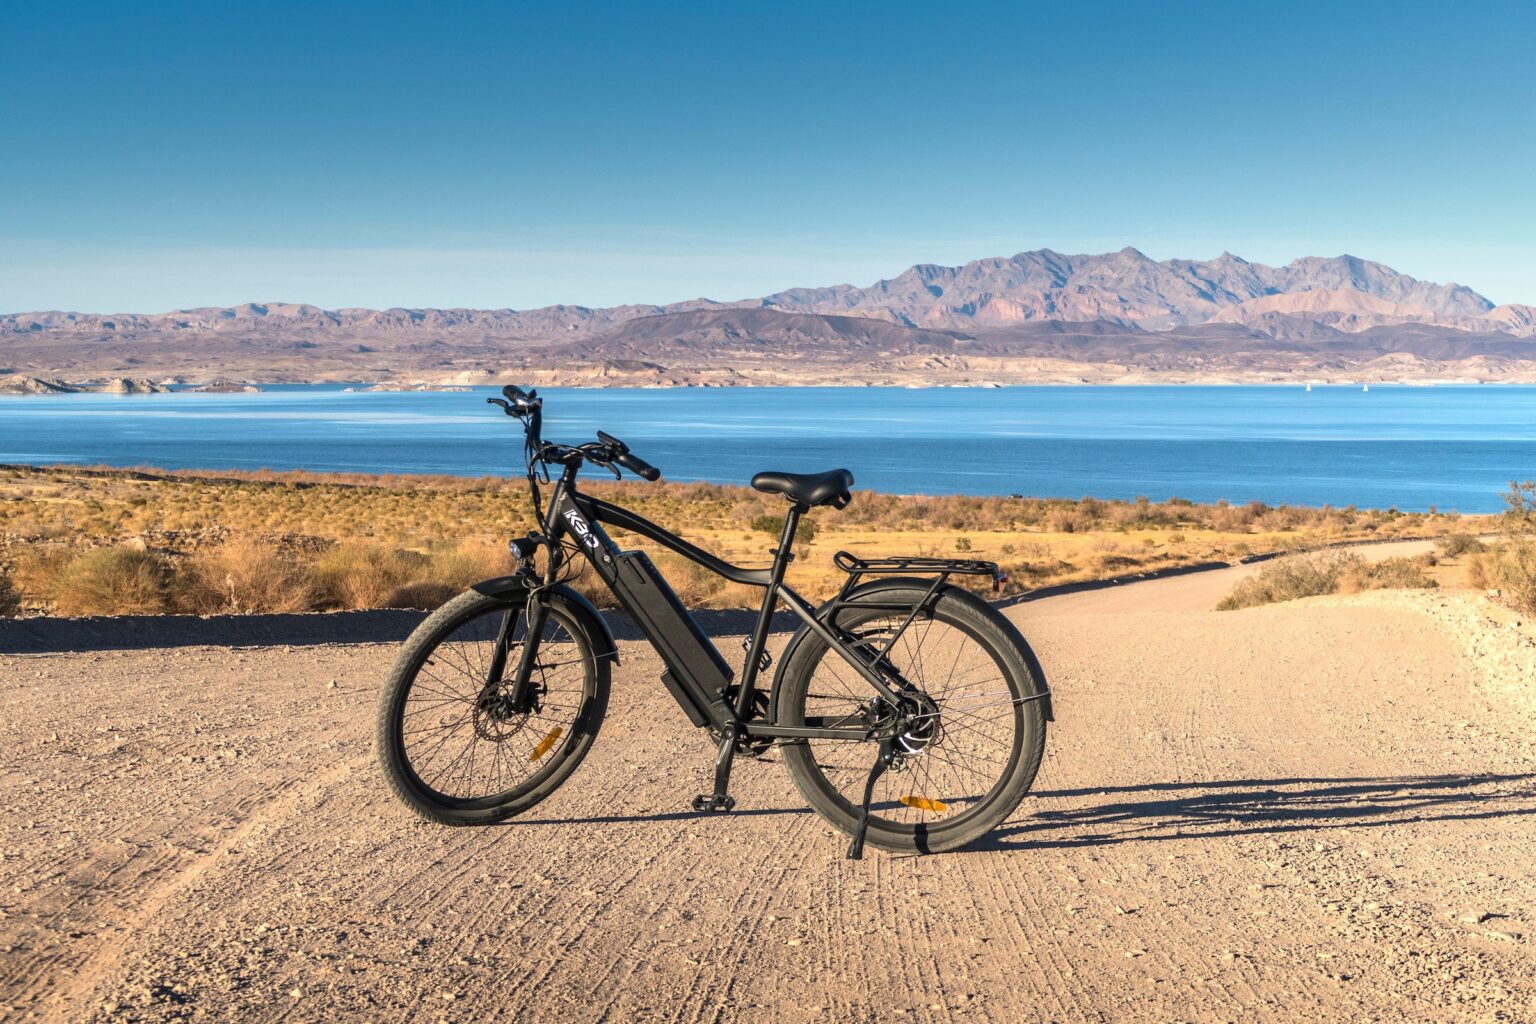 To consider buying an ebike, you must have a good idea of what it's used for. Find out more about electric bikes here.